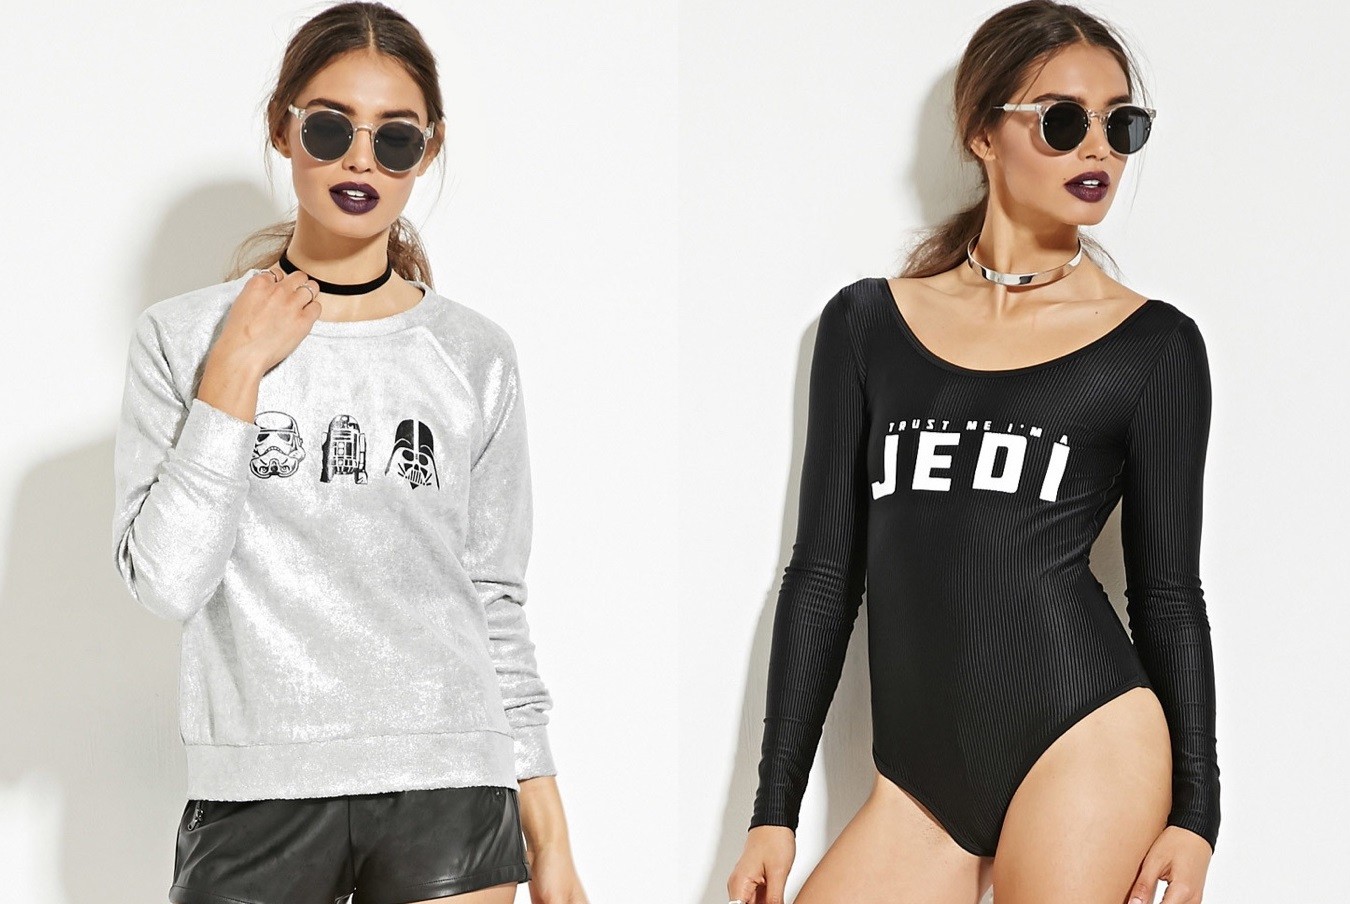 Forever 21 x Star Wars collection